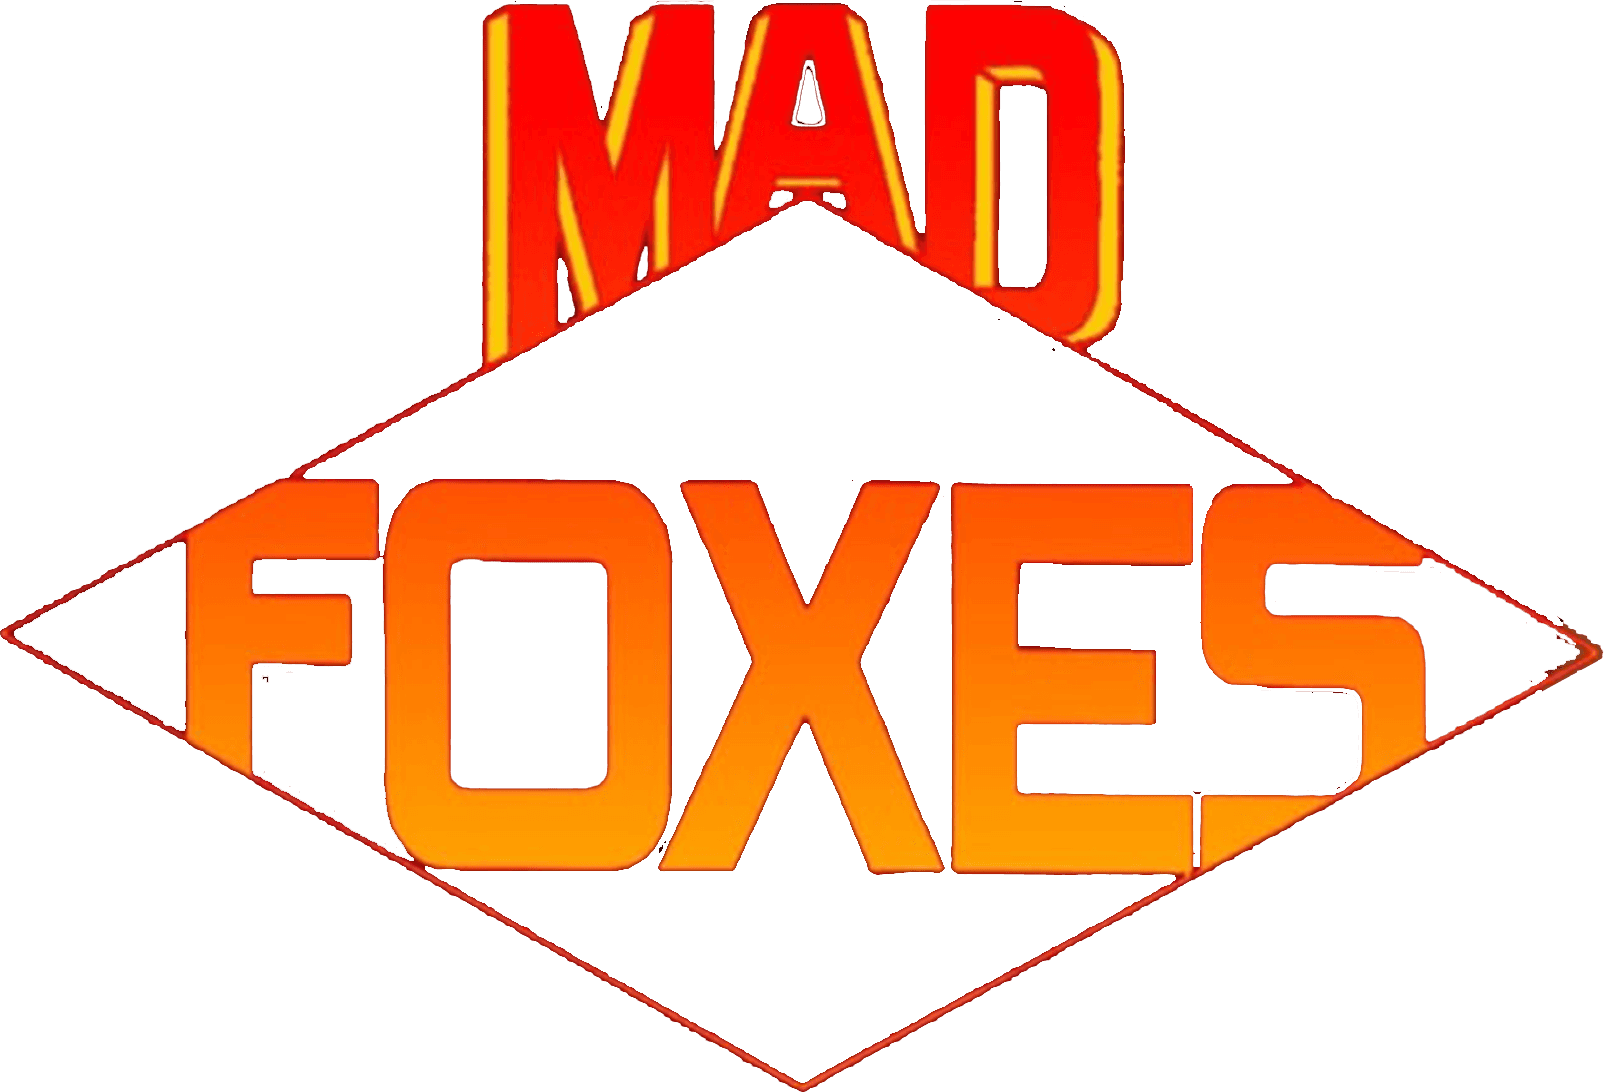 Mad Foxes logo